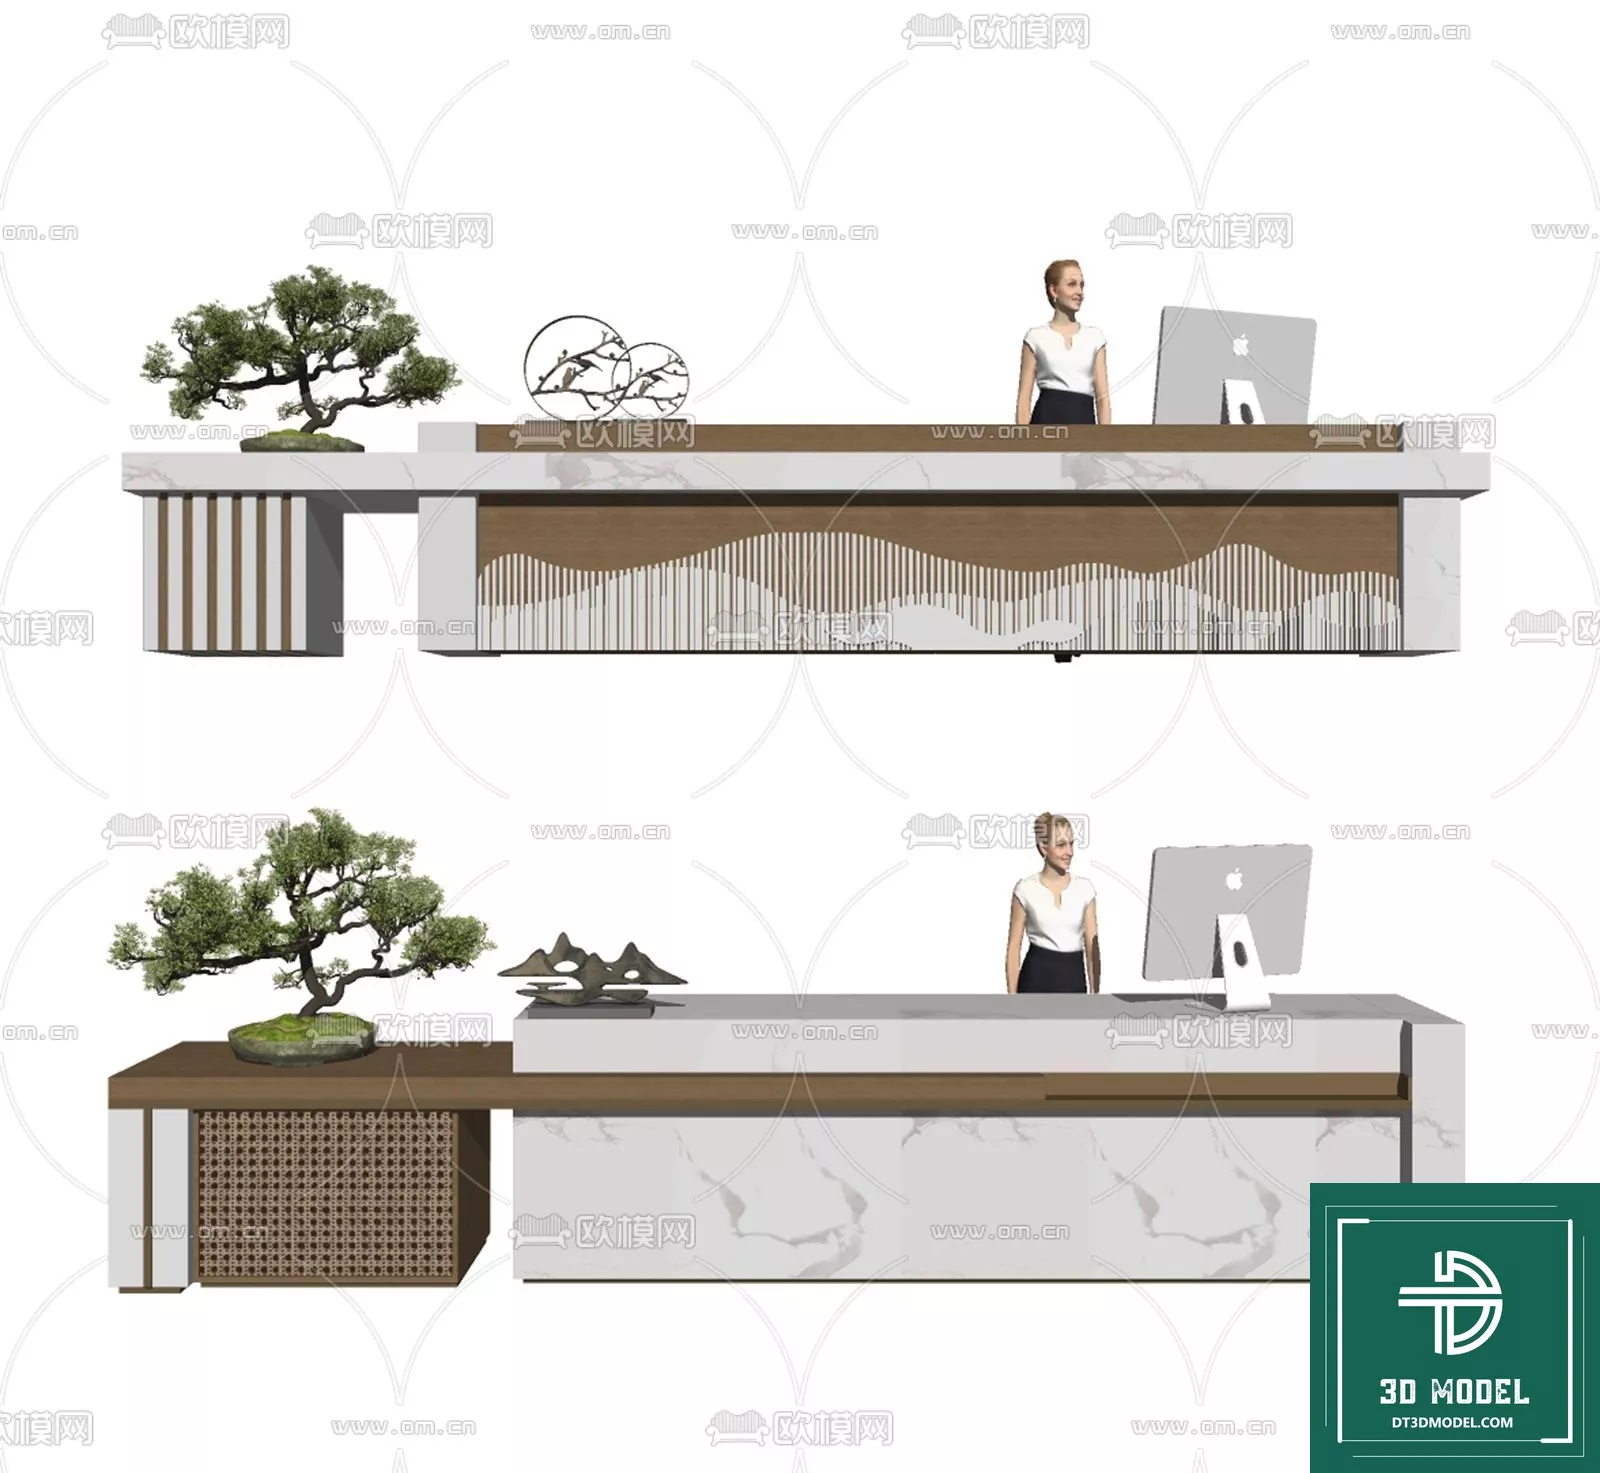 NEO CLASSIC RECEPTION - SKETCHUP 3D MODEL - VRAY OR ENSCAPE - ID17216